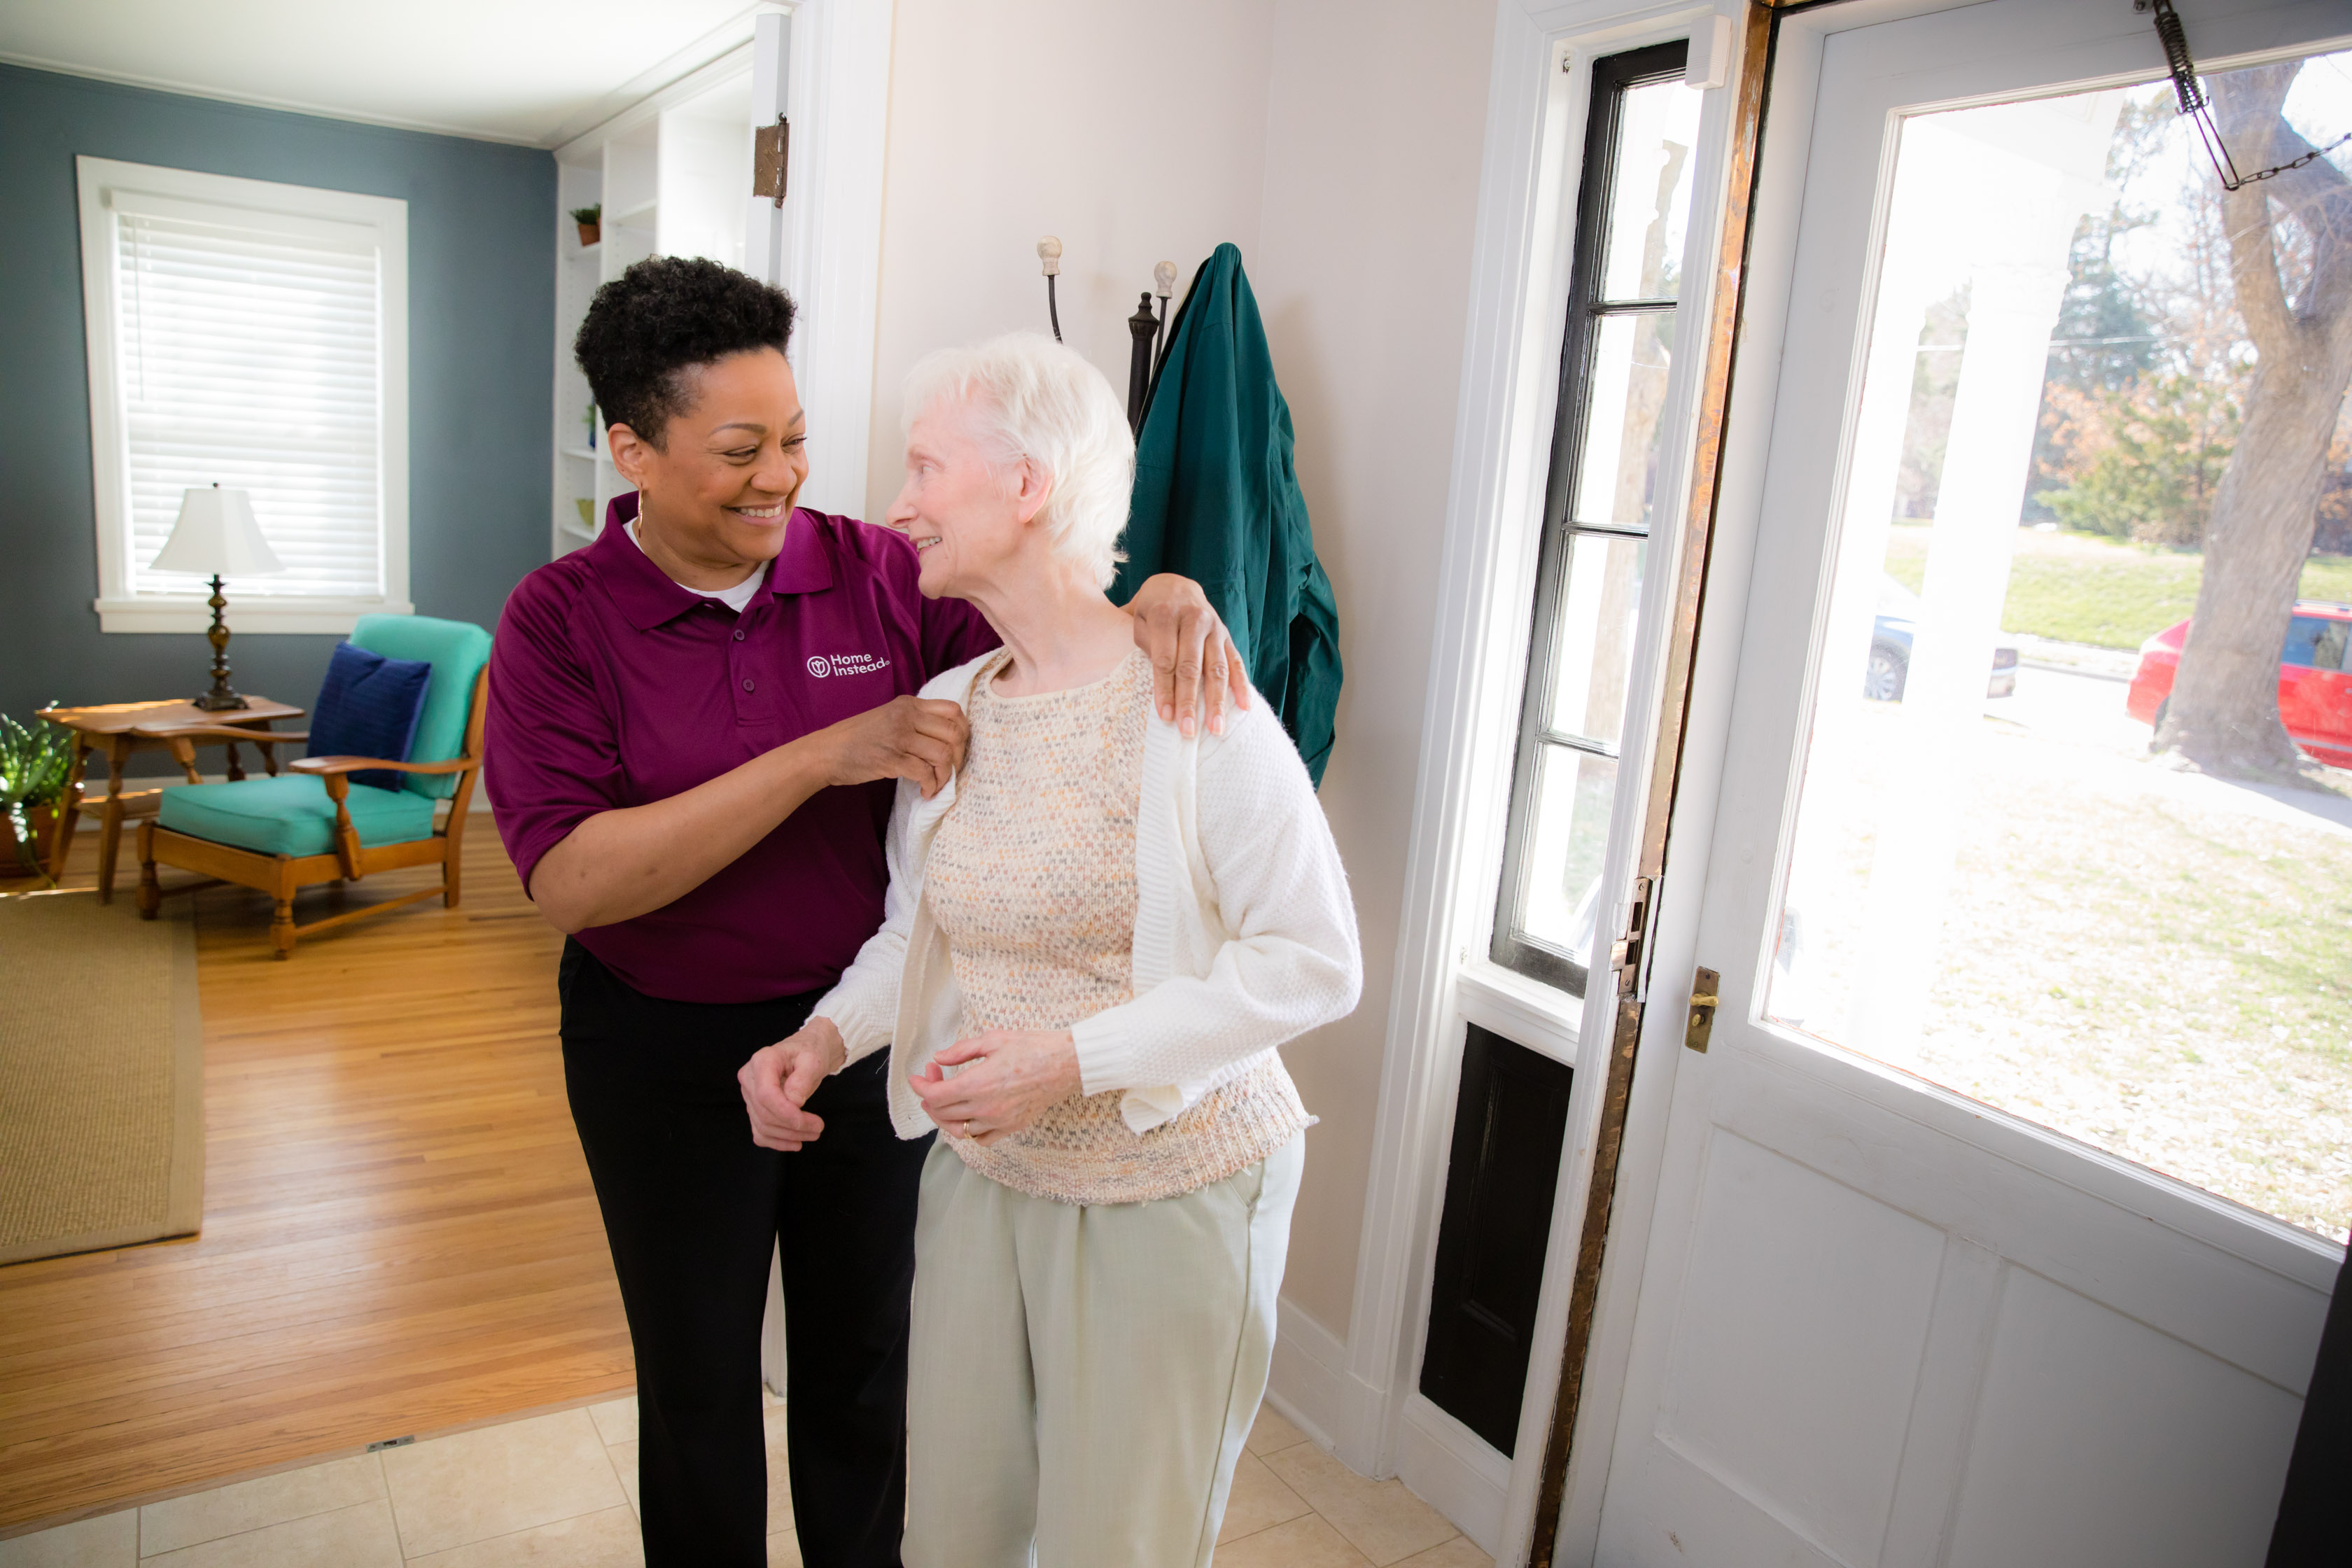 Home Instead Caregiver helping Client put on sweater